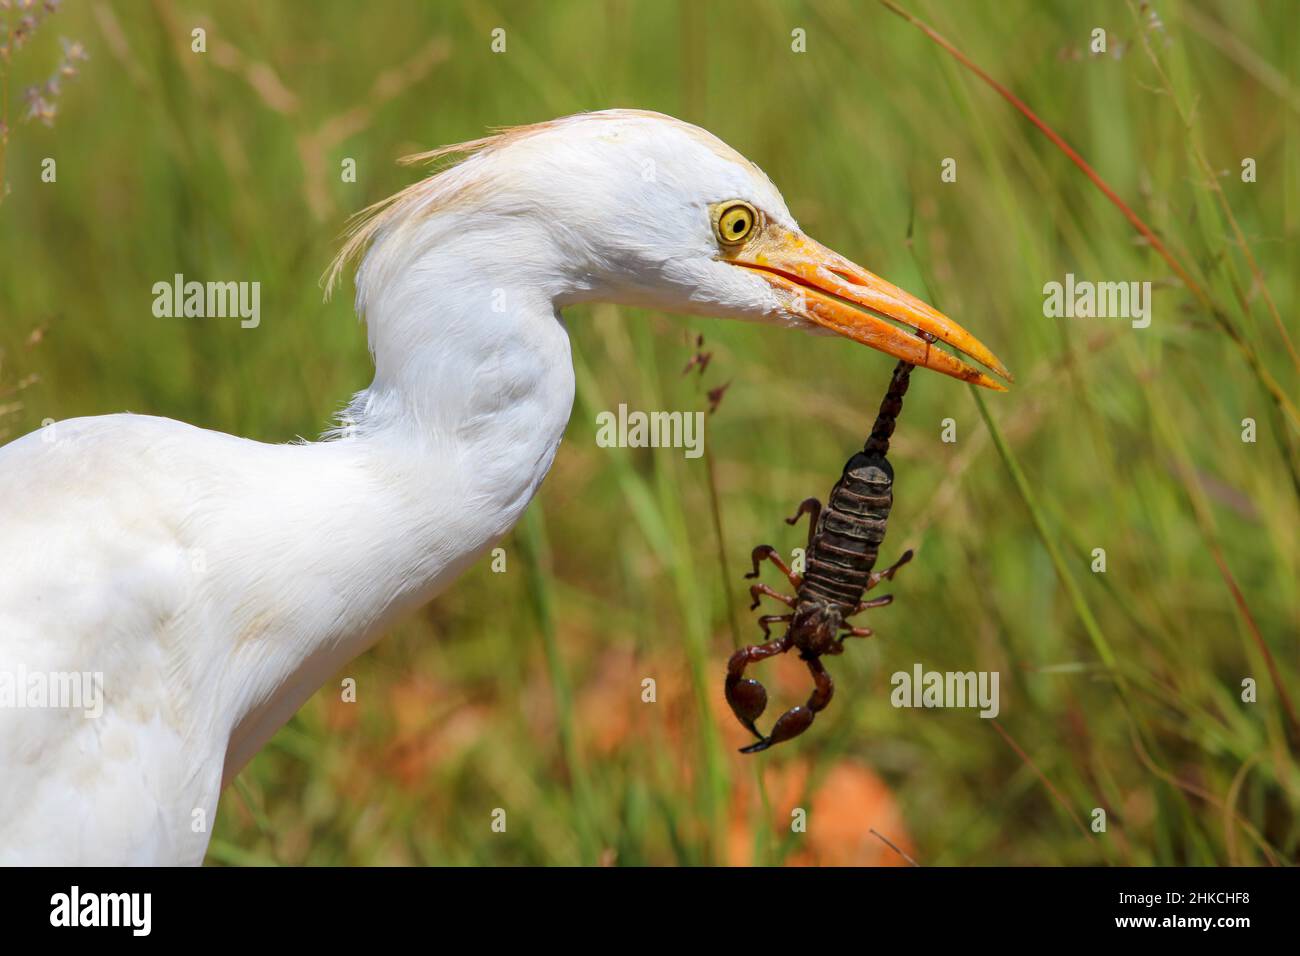 Western Cattle Egret with Pugnacious Burrowing Scorpion Prey, South Africa Stock Photo